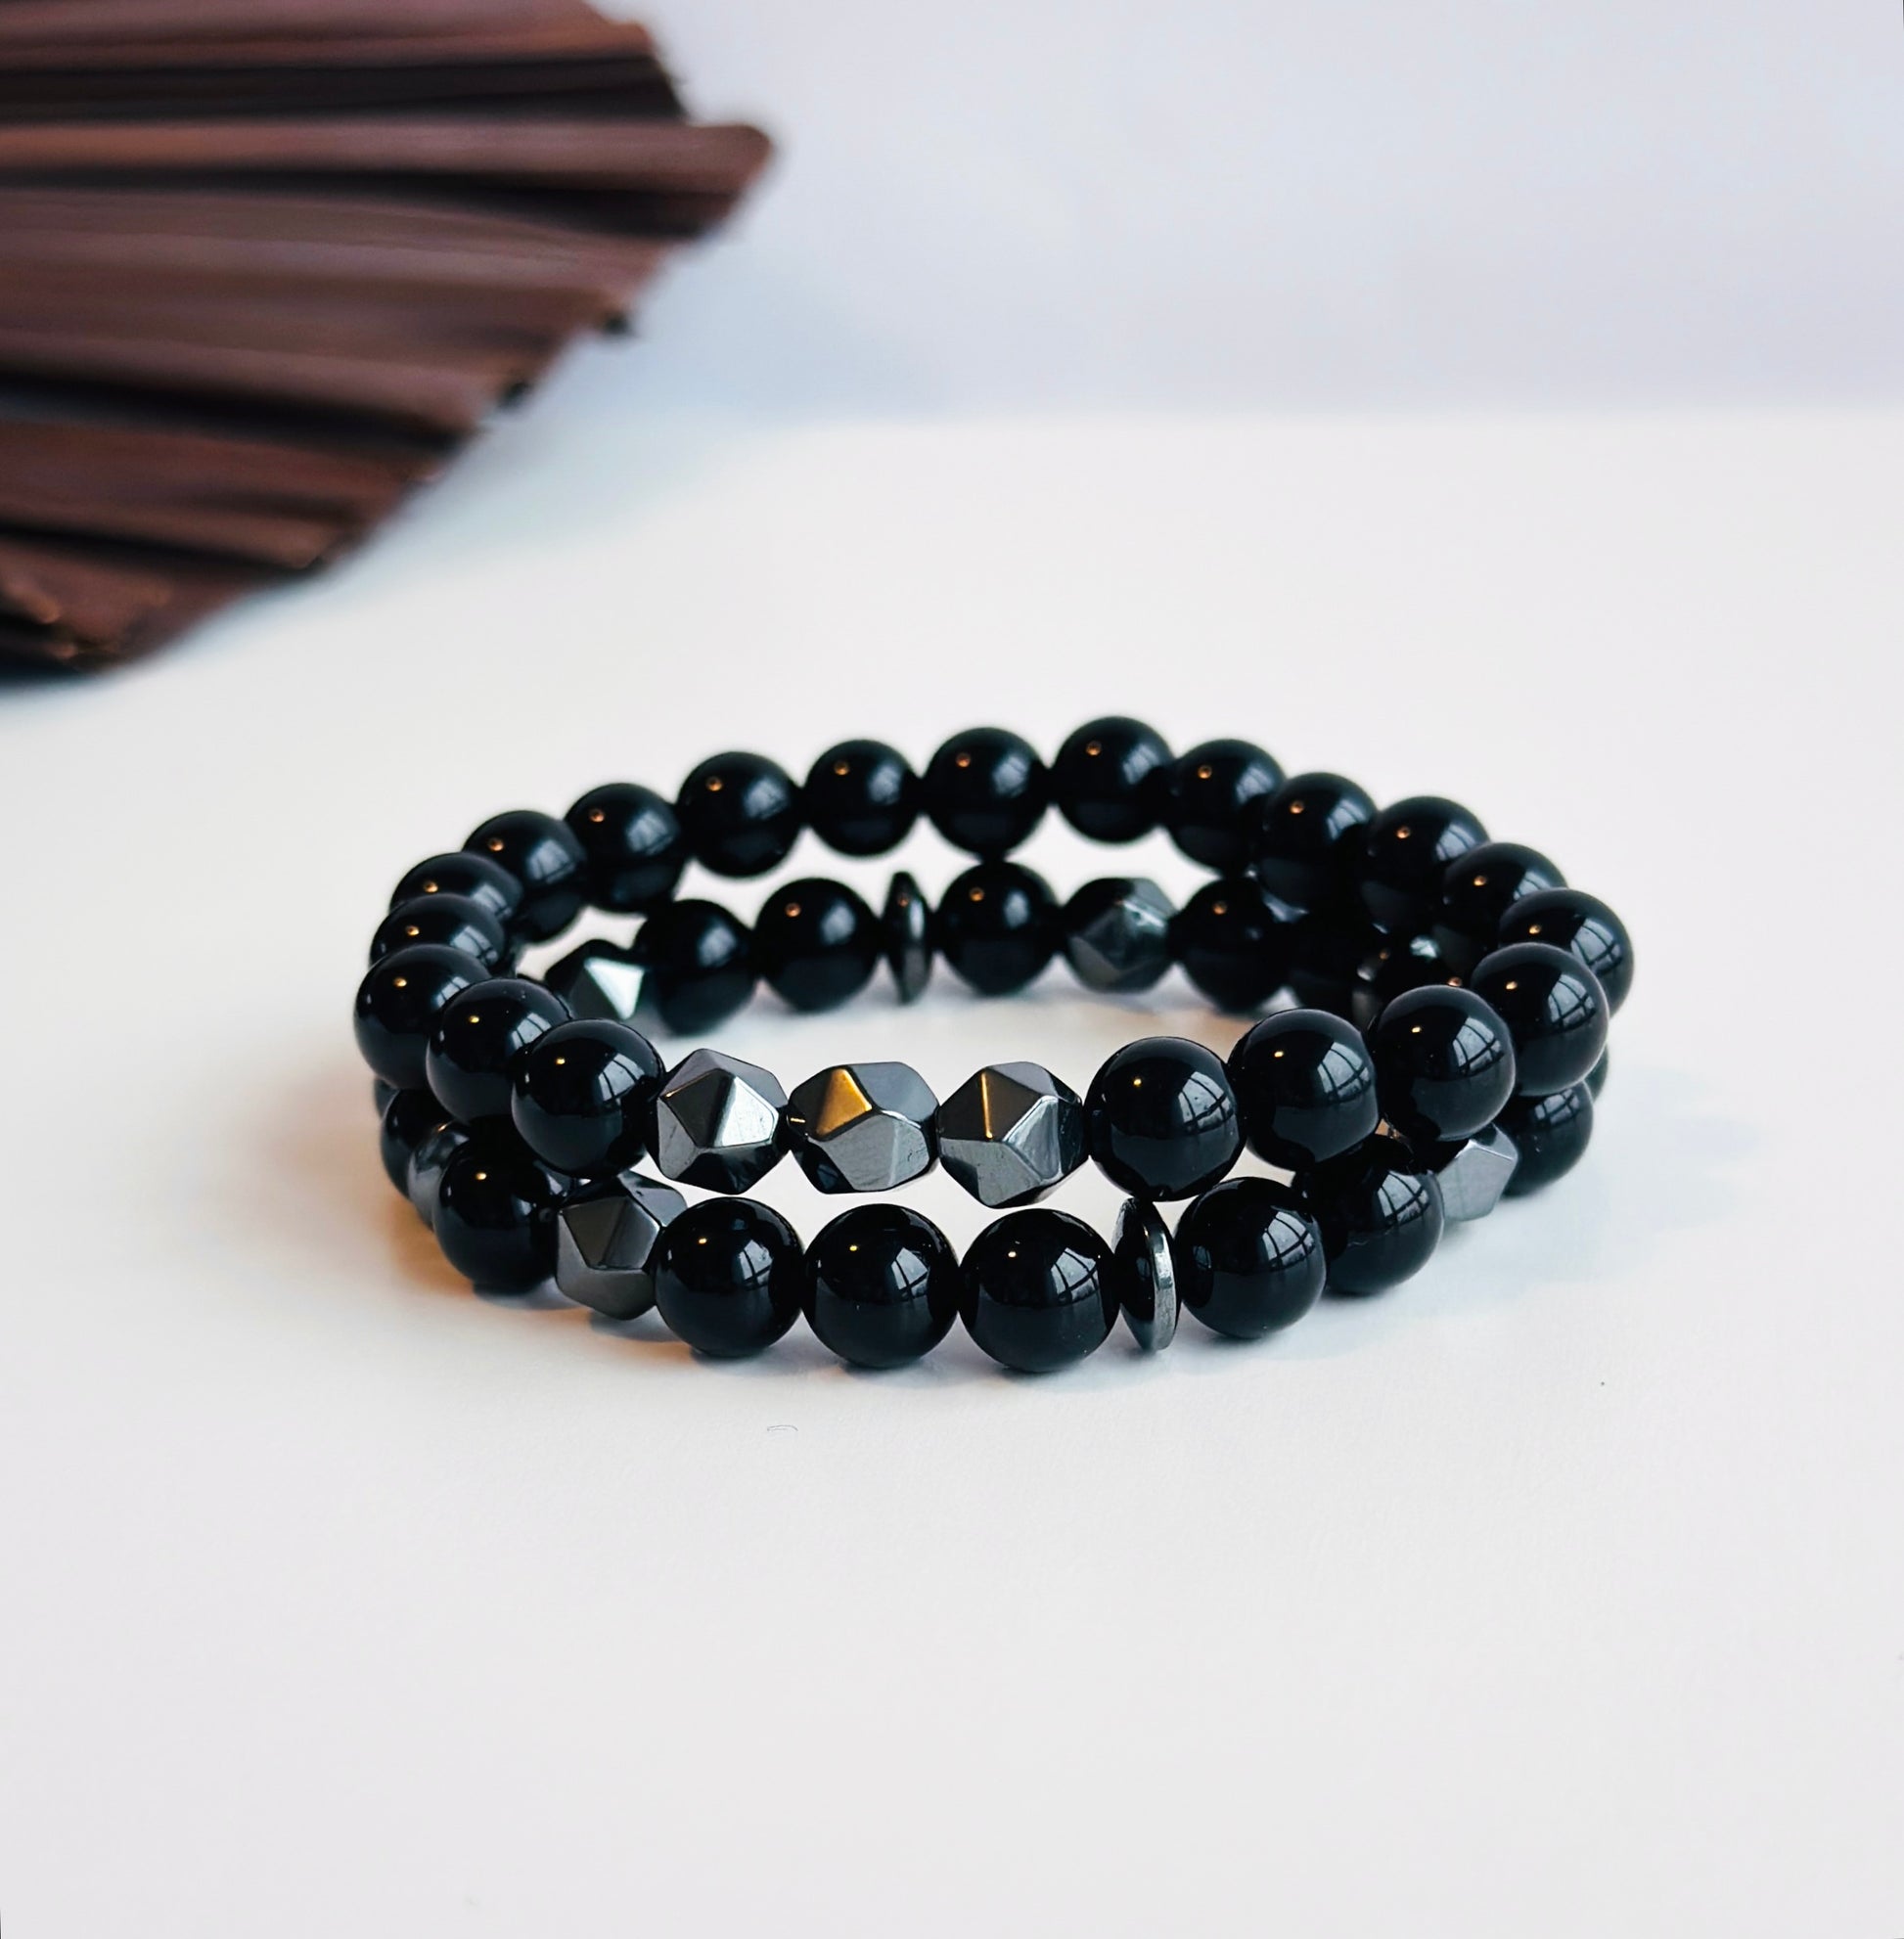 Introducing "The Midnight Fusion" set, not just a gemstone bracelet stack for men, but a harmonious blend of style and healing properties.  Crafted with meticulous precision, this ensemble features shiny black onyx, renowned for grounding energy and fostering inner strength. The faceted hematite beads not only add a touch of modern elegance but also bring the grounding and balancing benefits of hematite to the mix. Paired with hematite spacers, this stack promotes focus, protection, and a sense of calm.